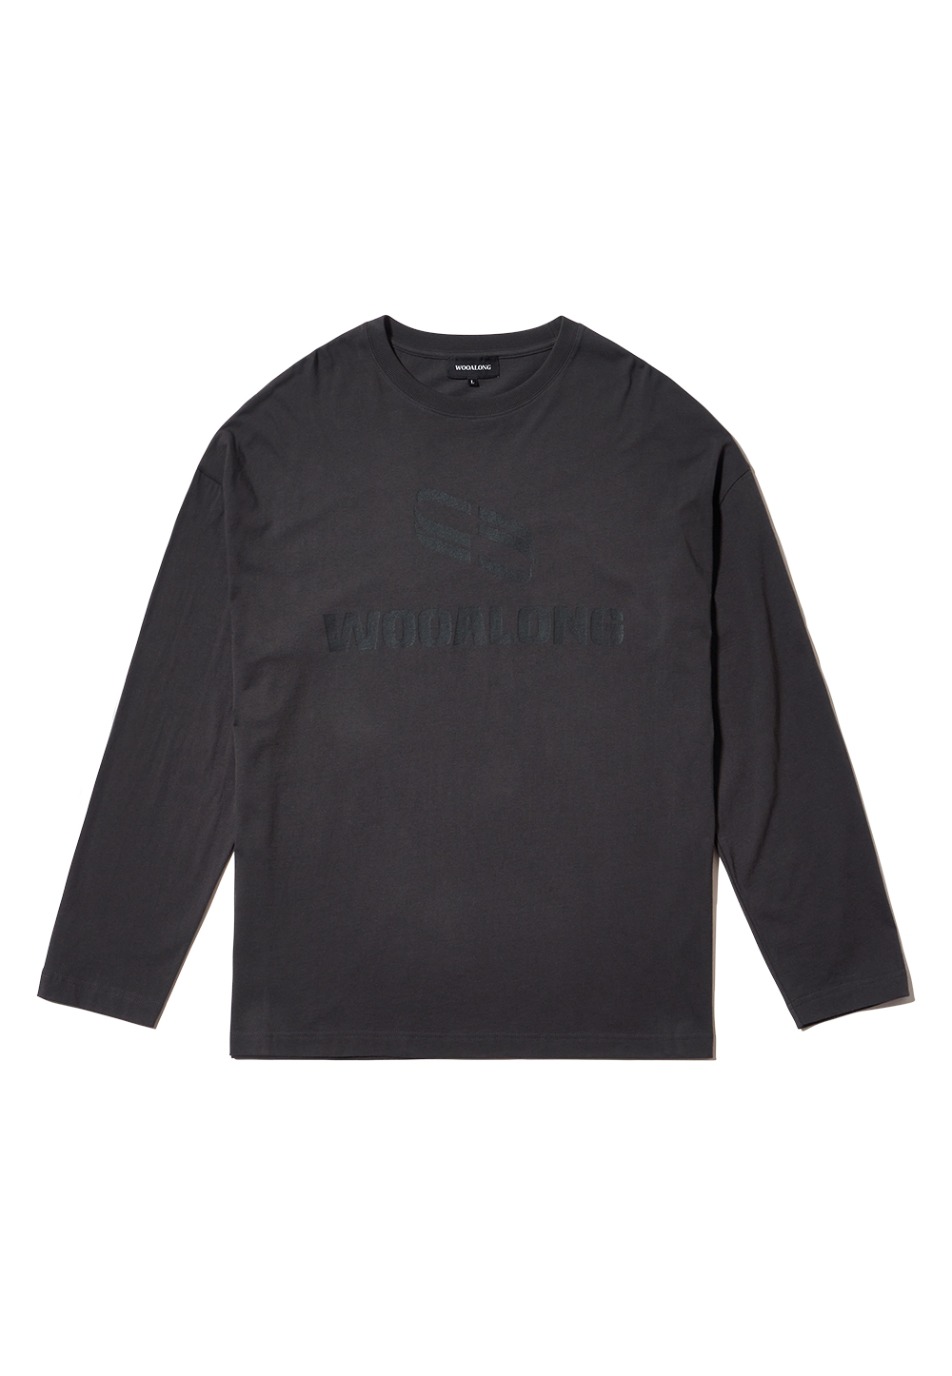 Spin logo over fit long sleeve - CHARCOAL